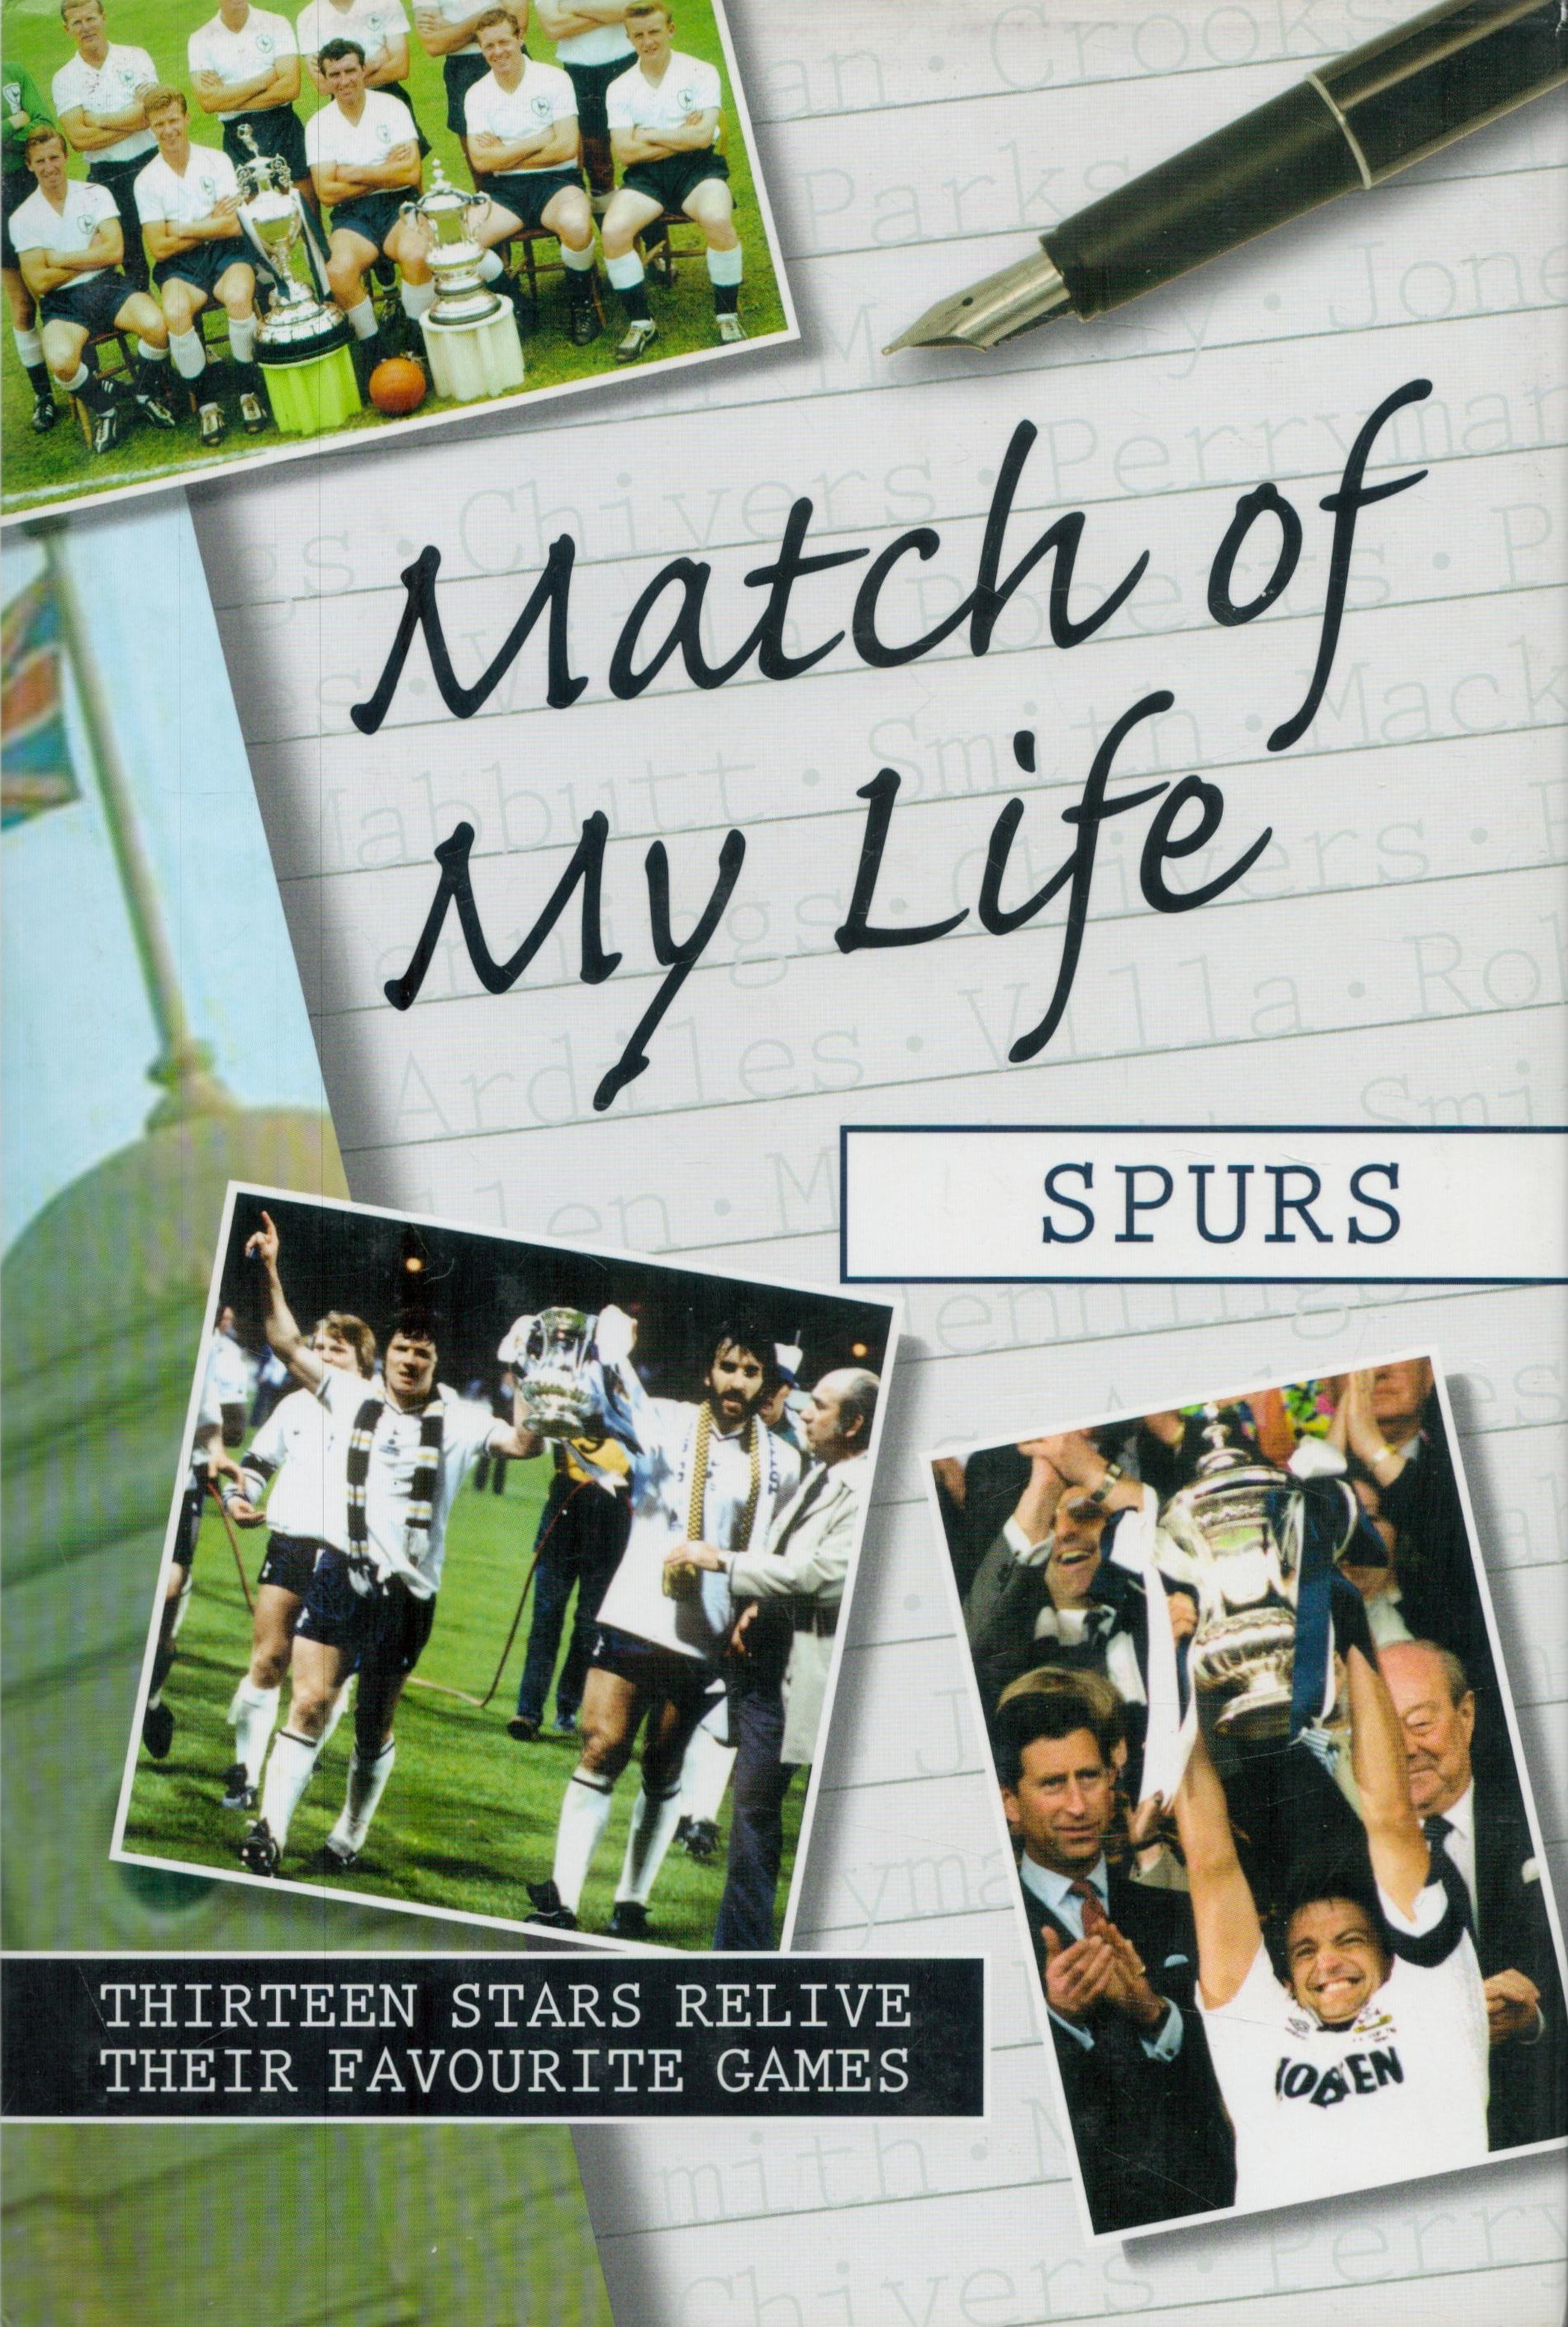 Match of my life - Spurs multi-signed hardback book. Signature clippings attached to inside pages.